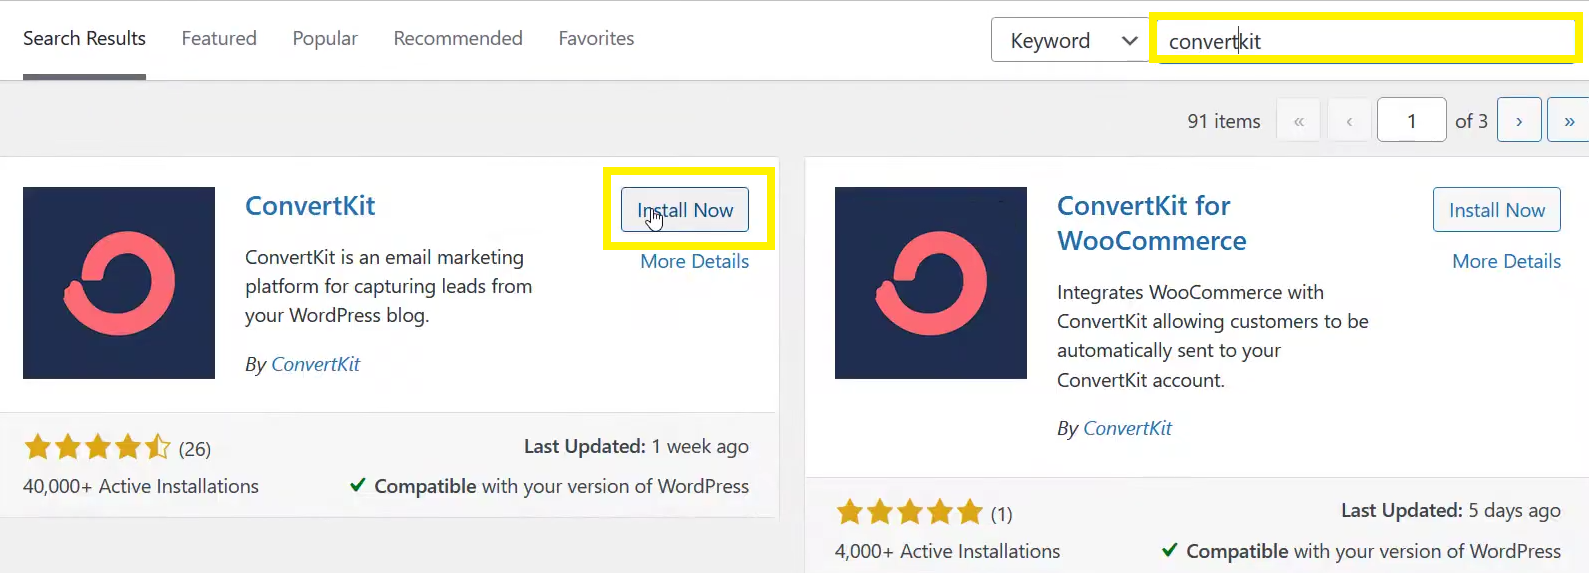 Search convertkit in the search bar. click on the install now button.